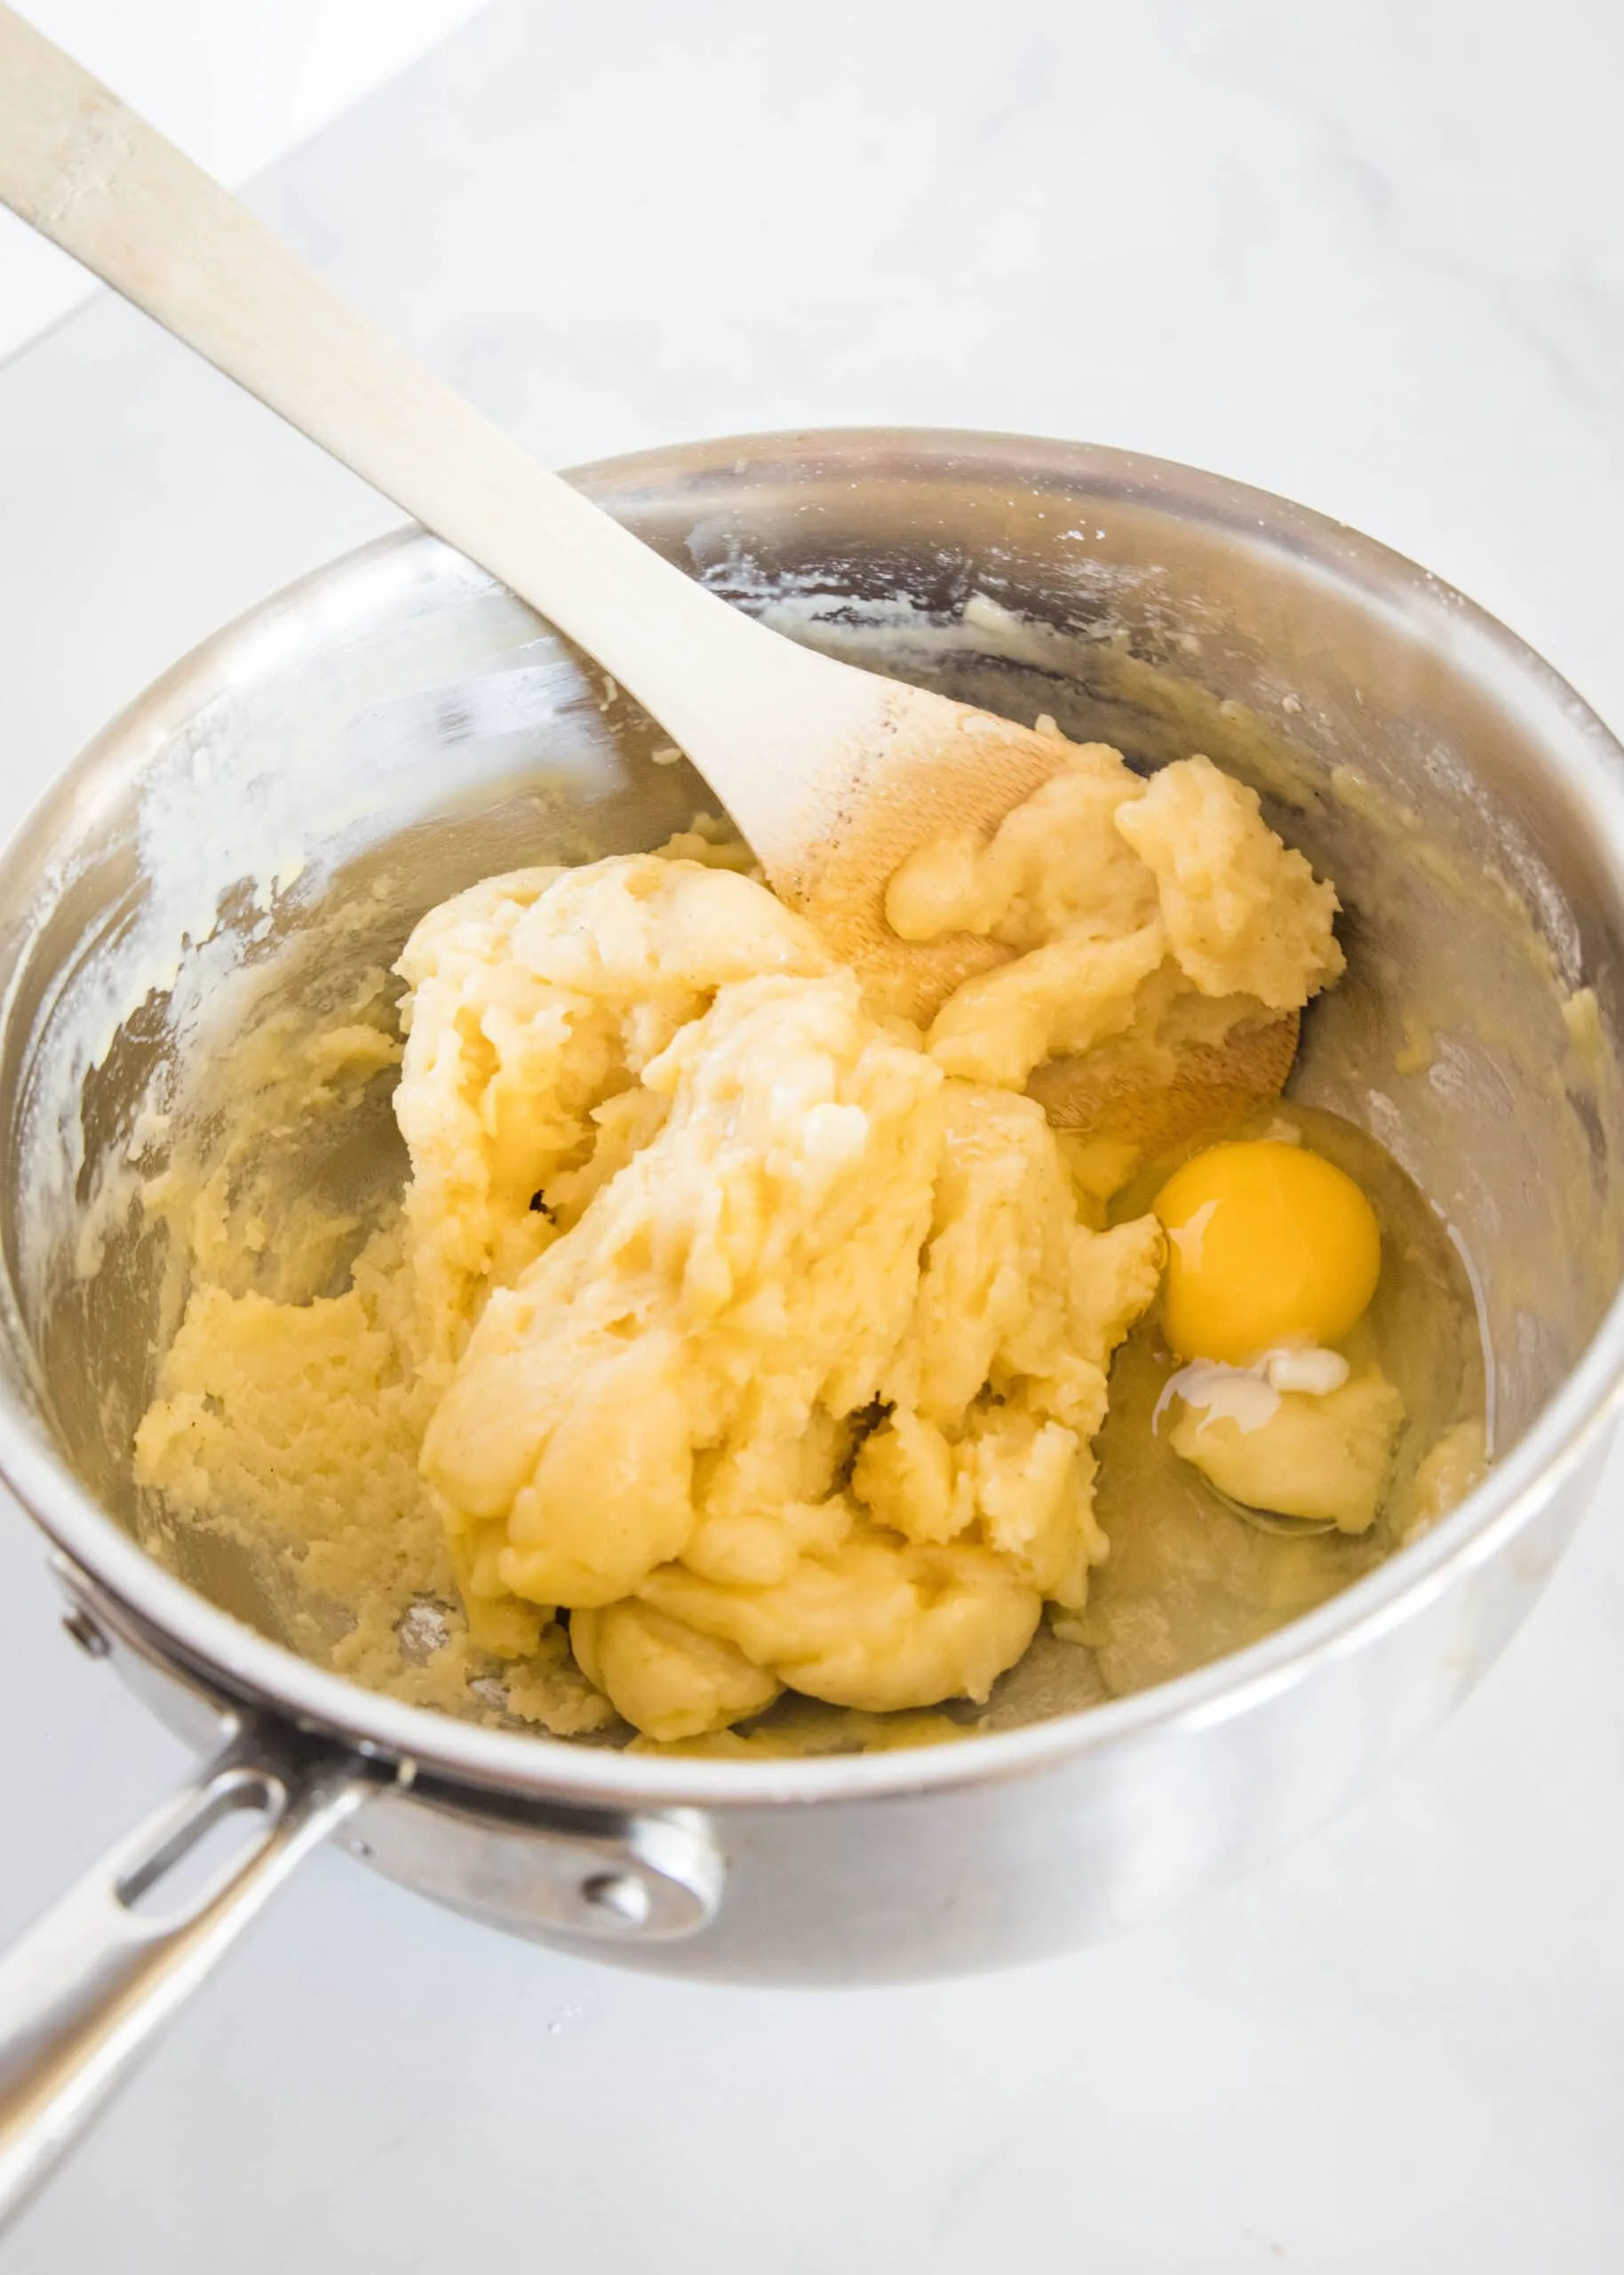 second egg being stirred into dough